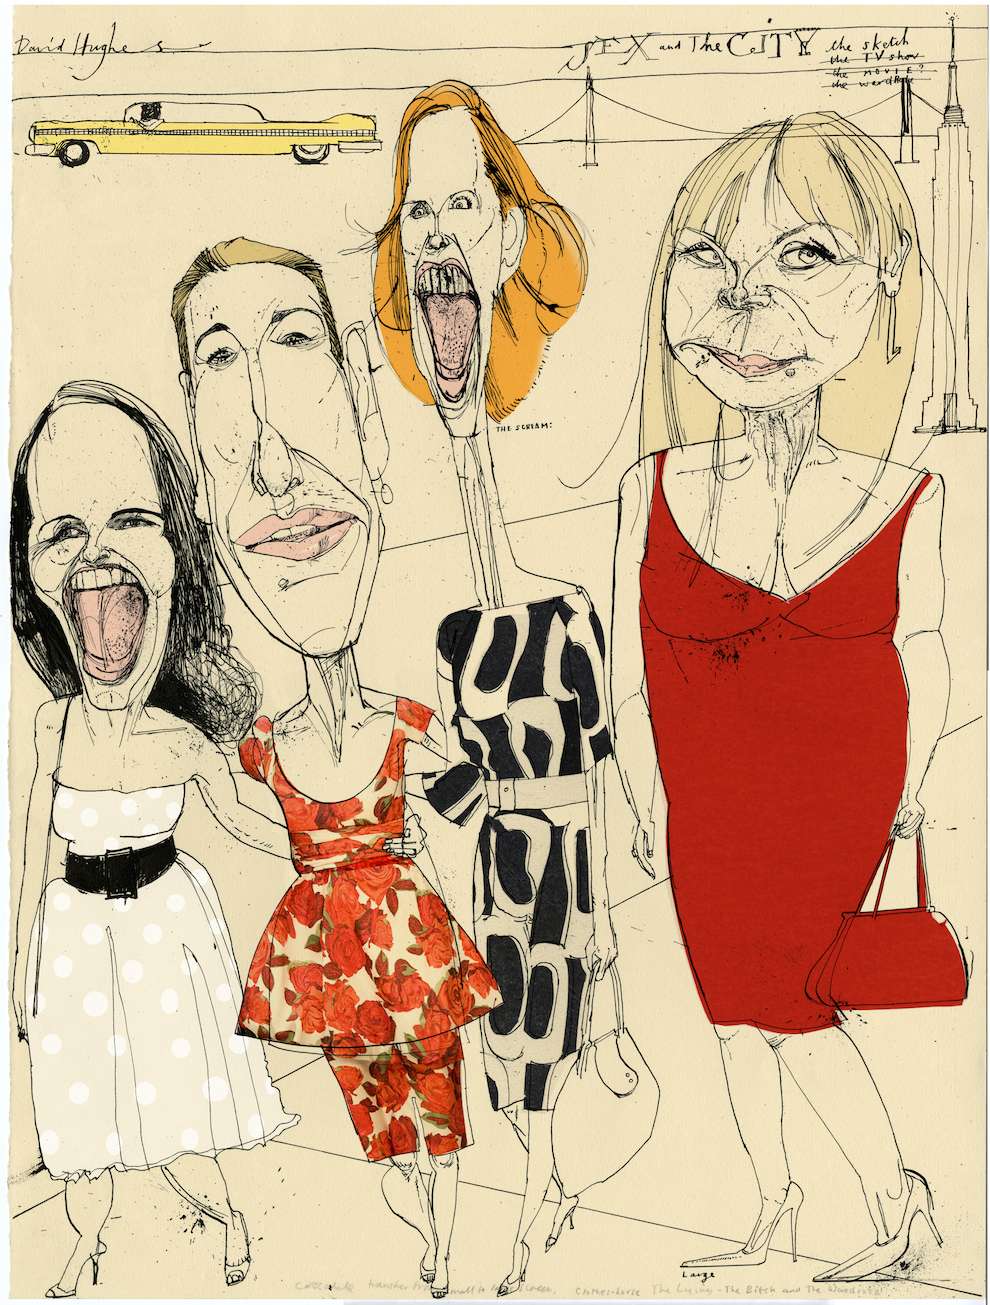 David Hughes, Caricatural portrait of sex & the city characters 